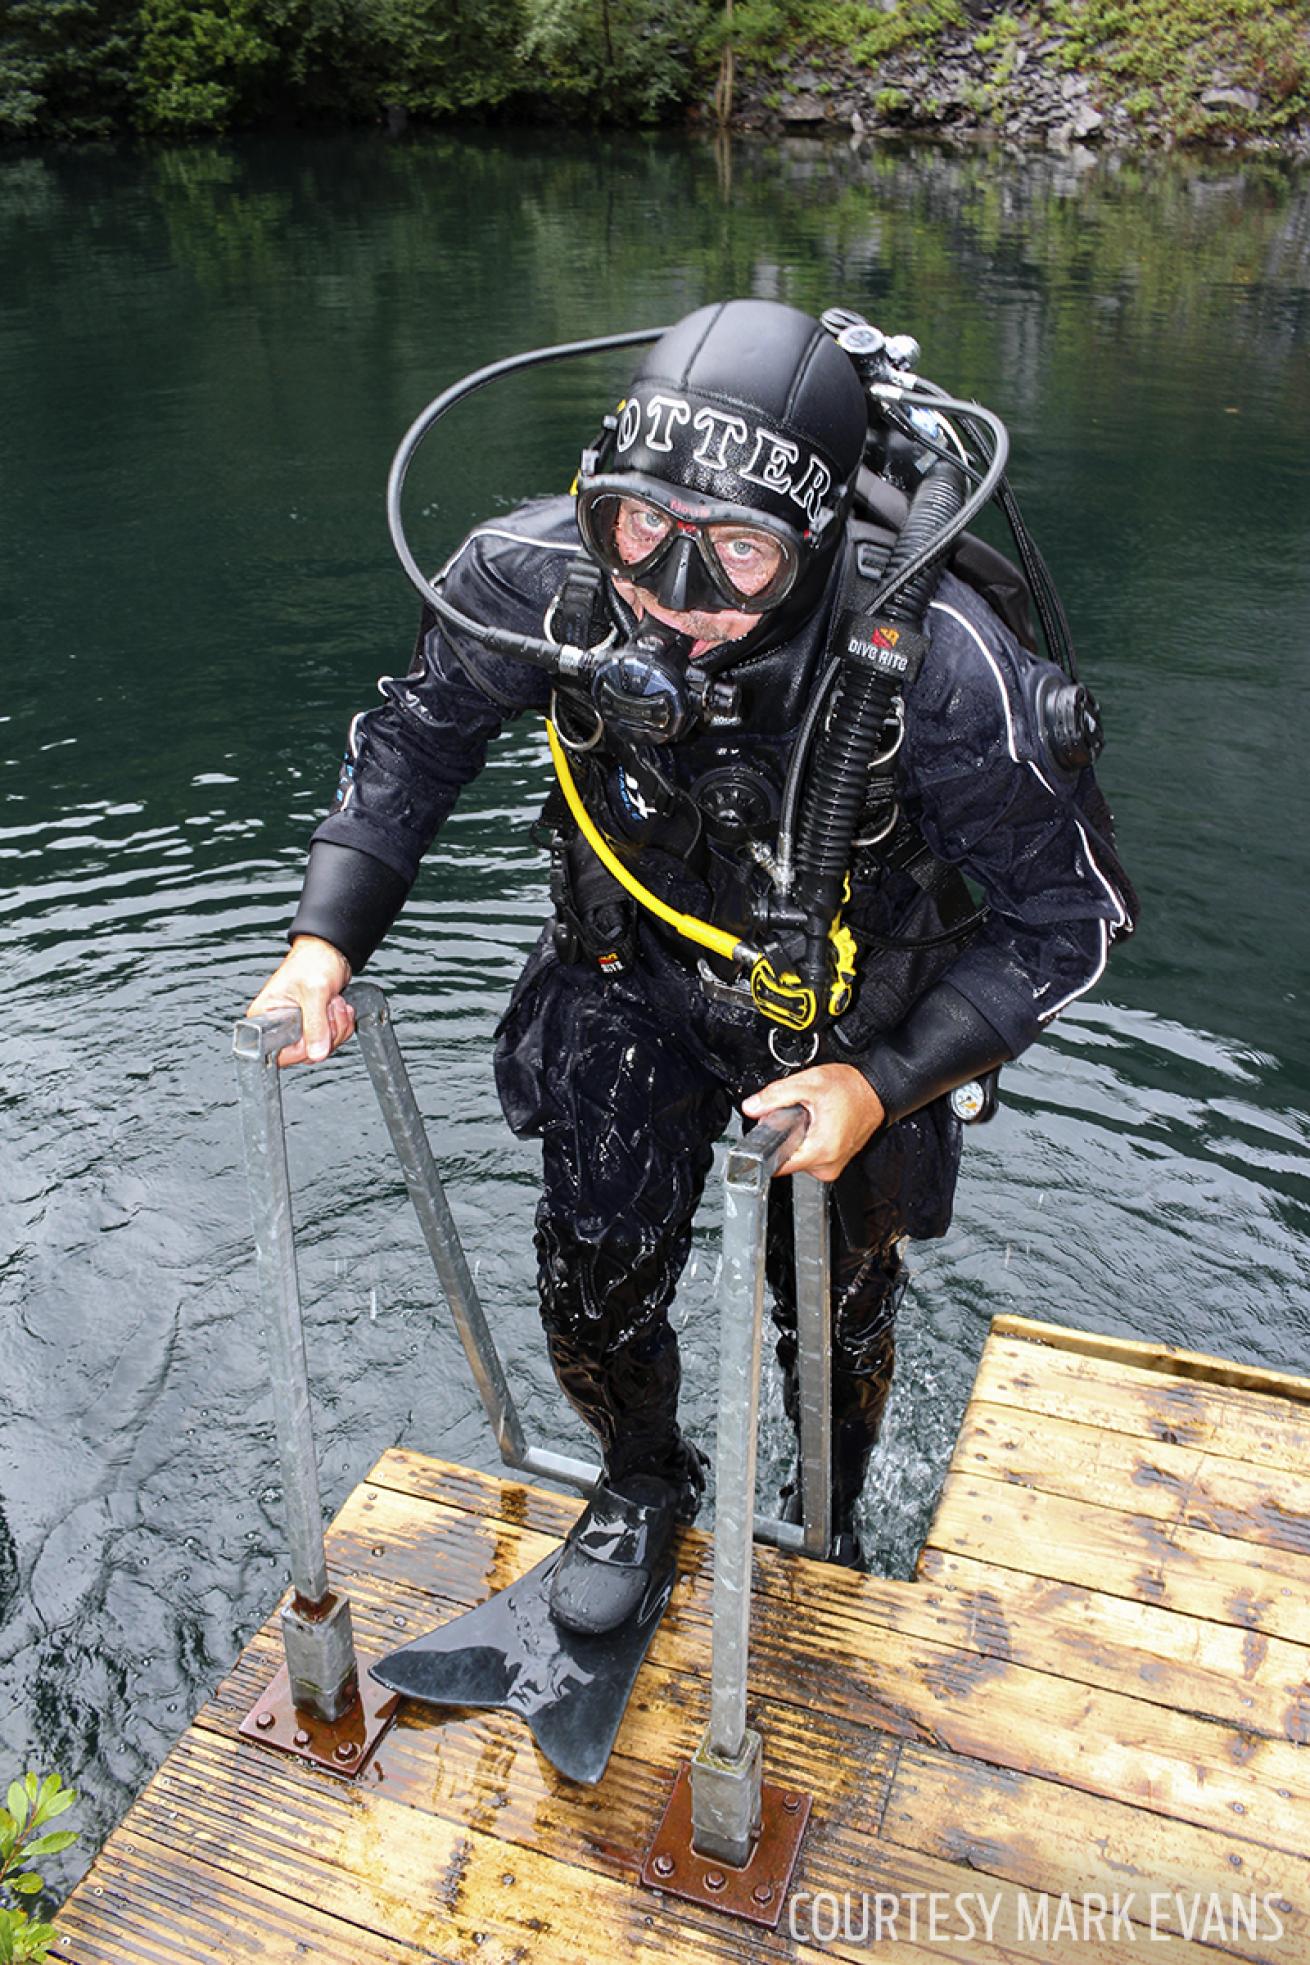 ScubaLab test diver returning from diving Waterproof drysuit